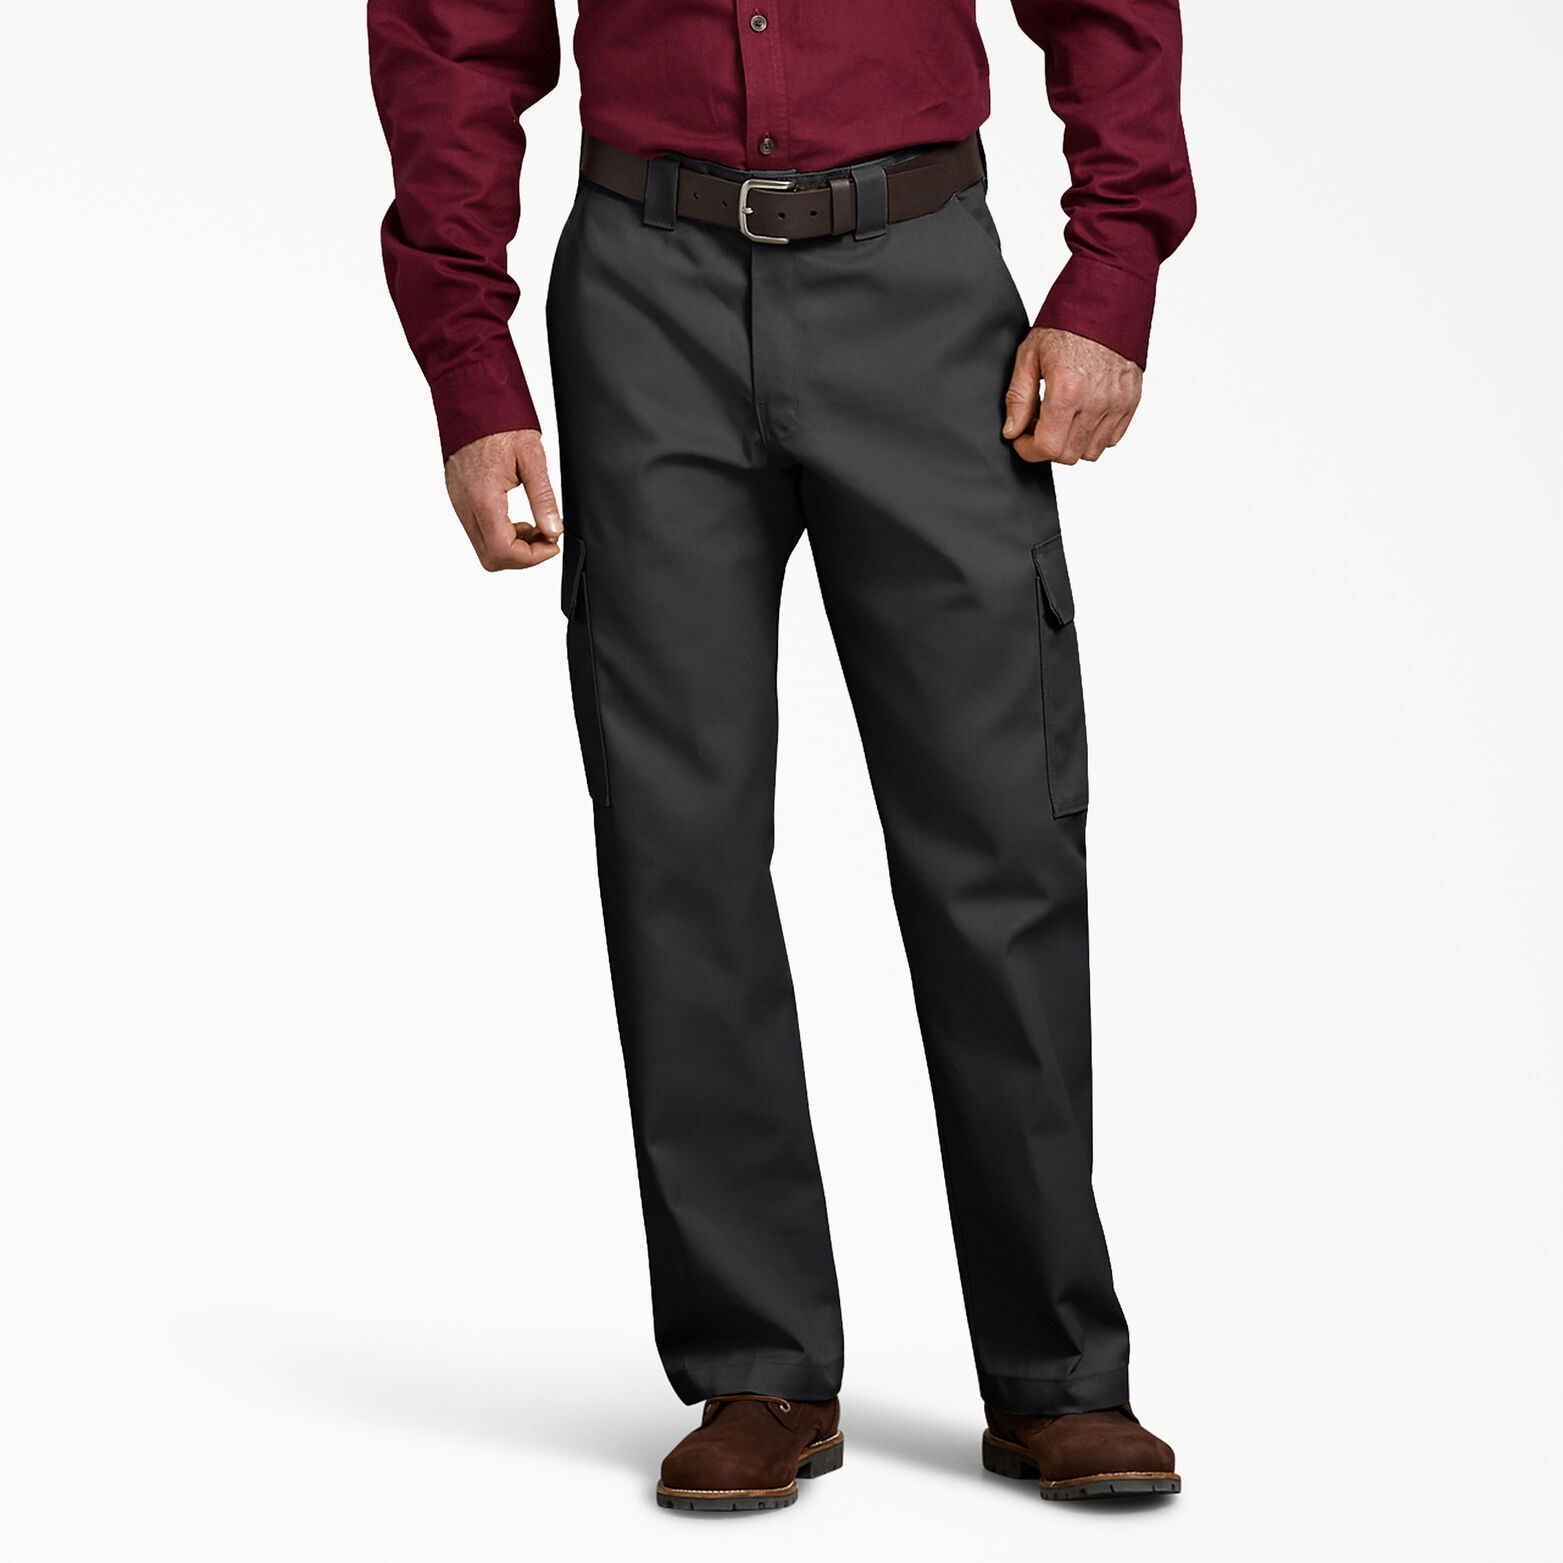 Relaxed Fit Straight Leg Cargo Work Pants | Men's | Dickies